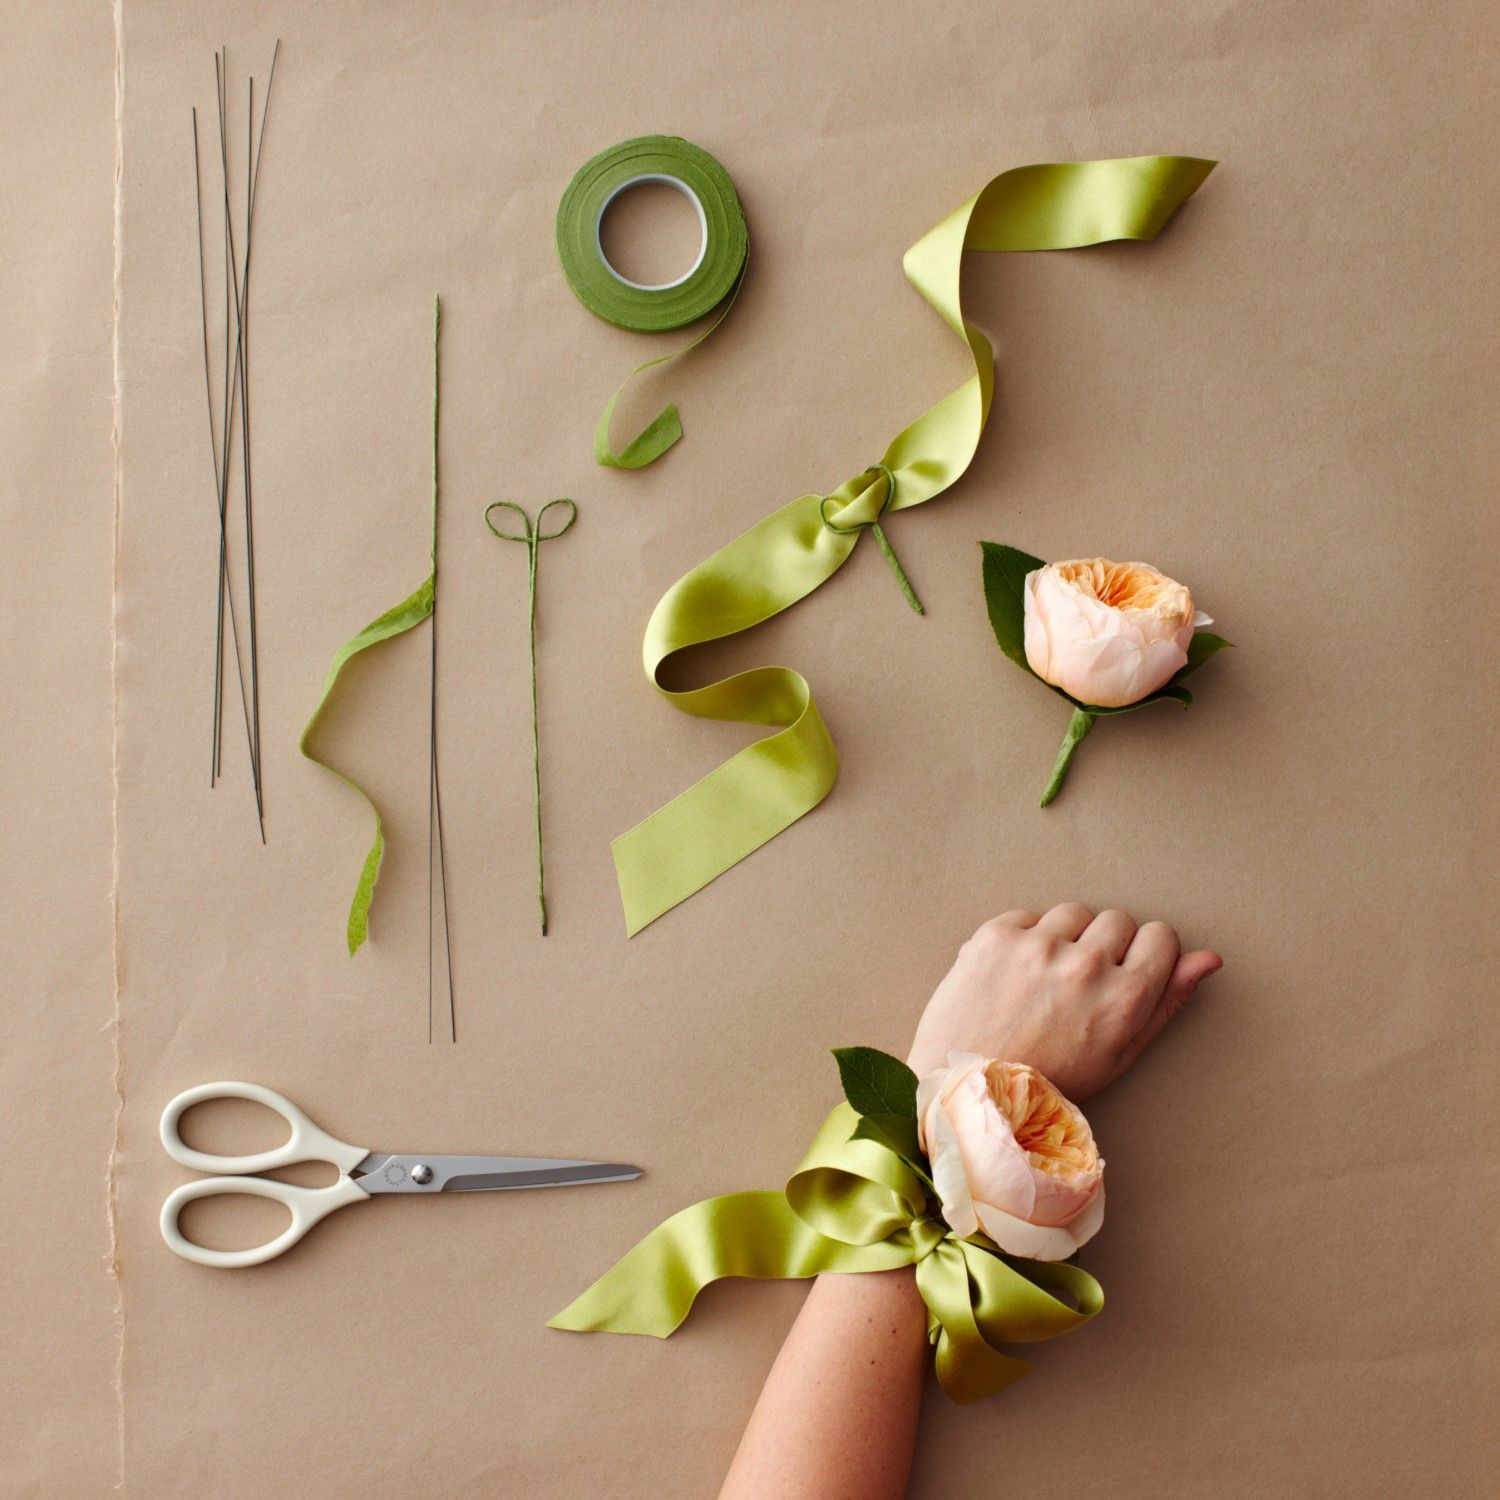 DIY Wedding Corsages
 DIY a wrist corsage for the mother of the bride or groom